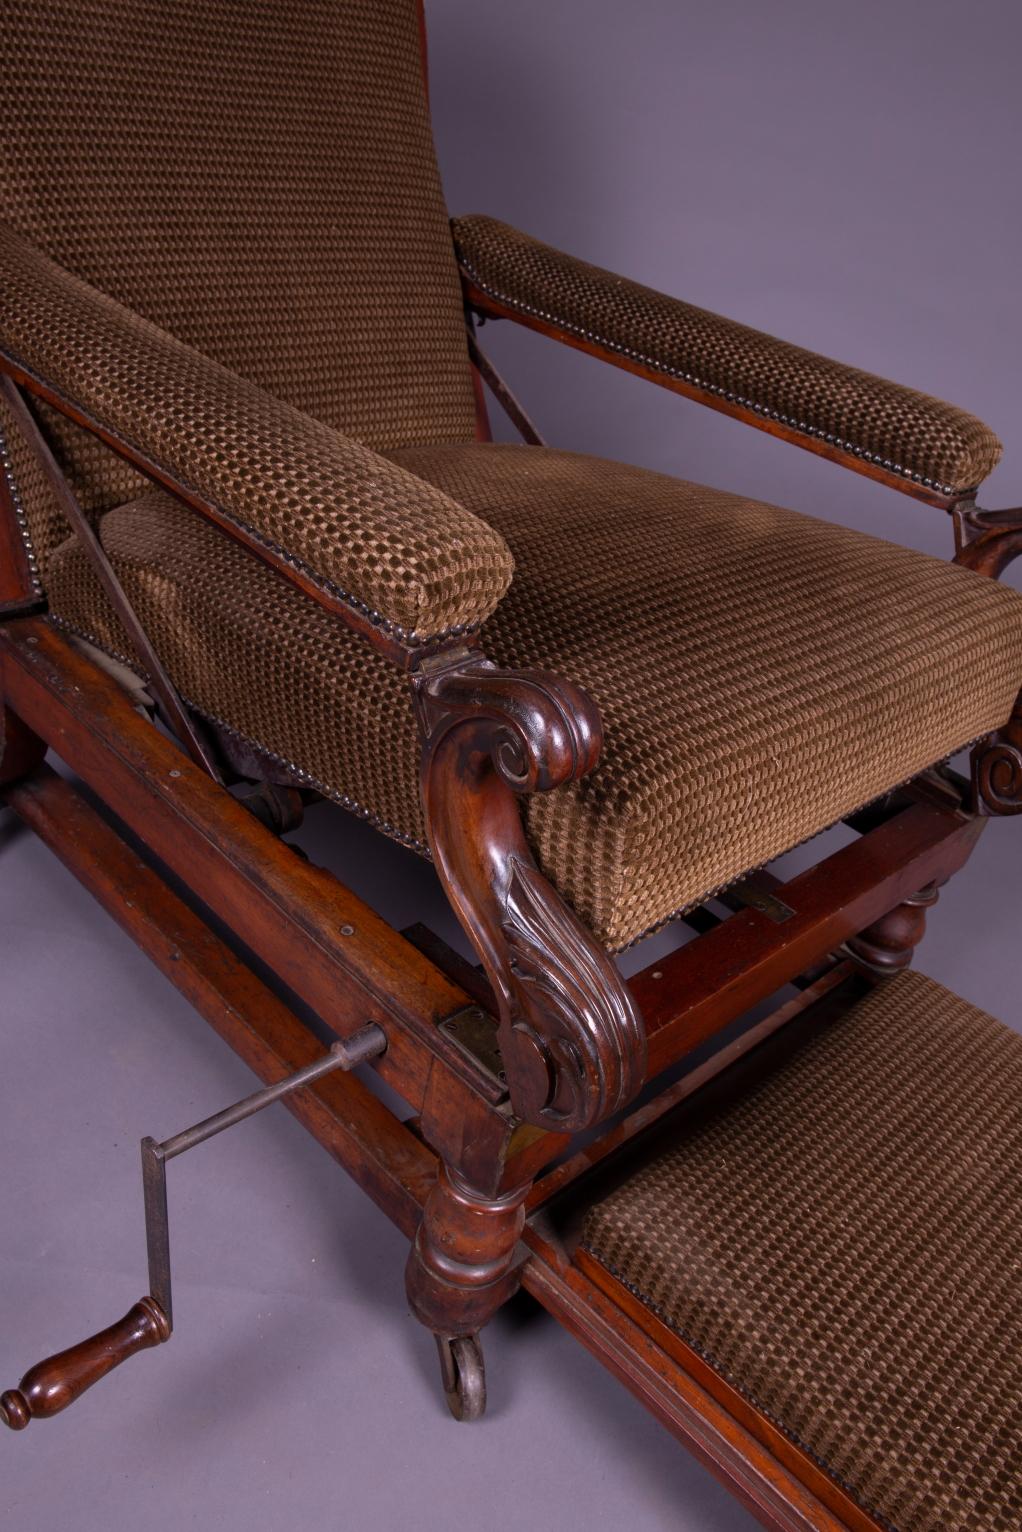 Reclining Victorian campaign chair, circa 1850 with winding mechanism and extending foot rest. Excellent quality, bearing the maker's name of Alderman, 16 Soho Square, London.